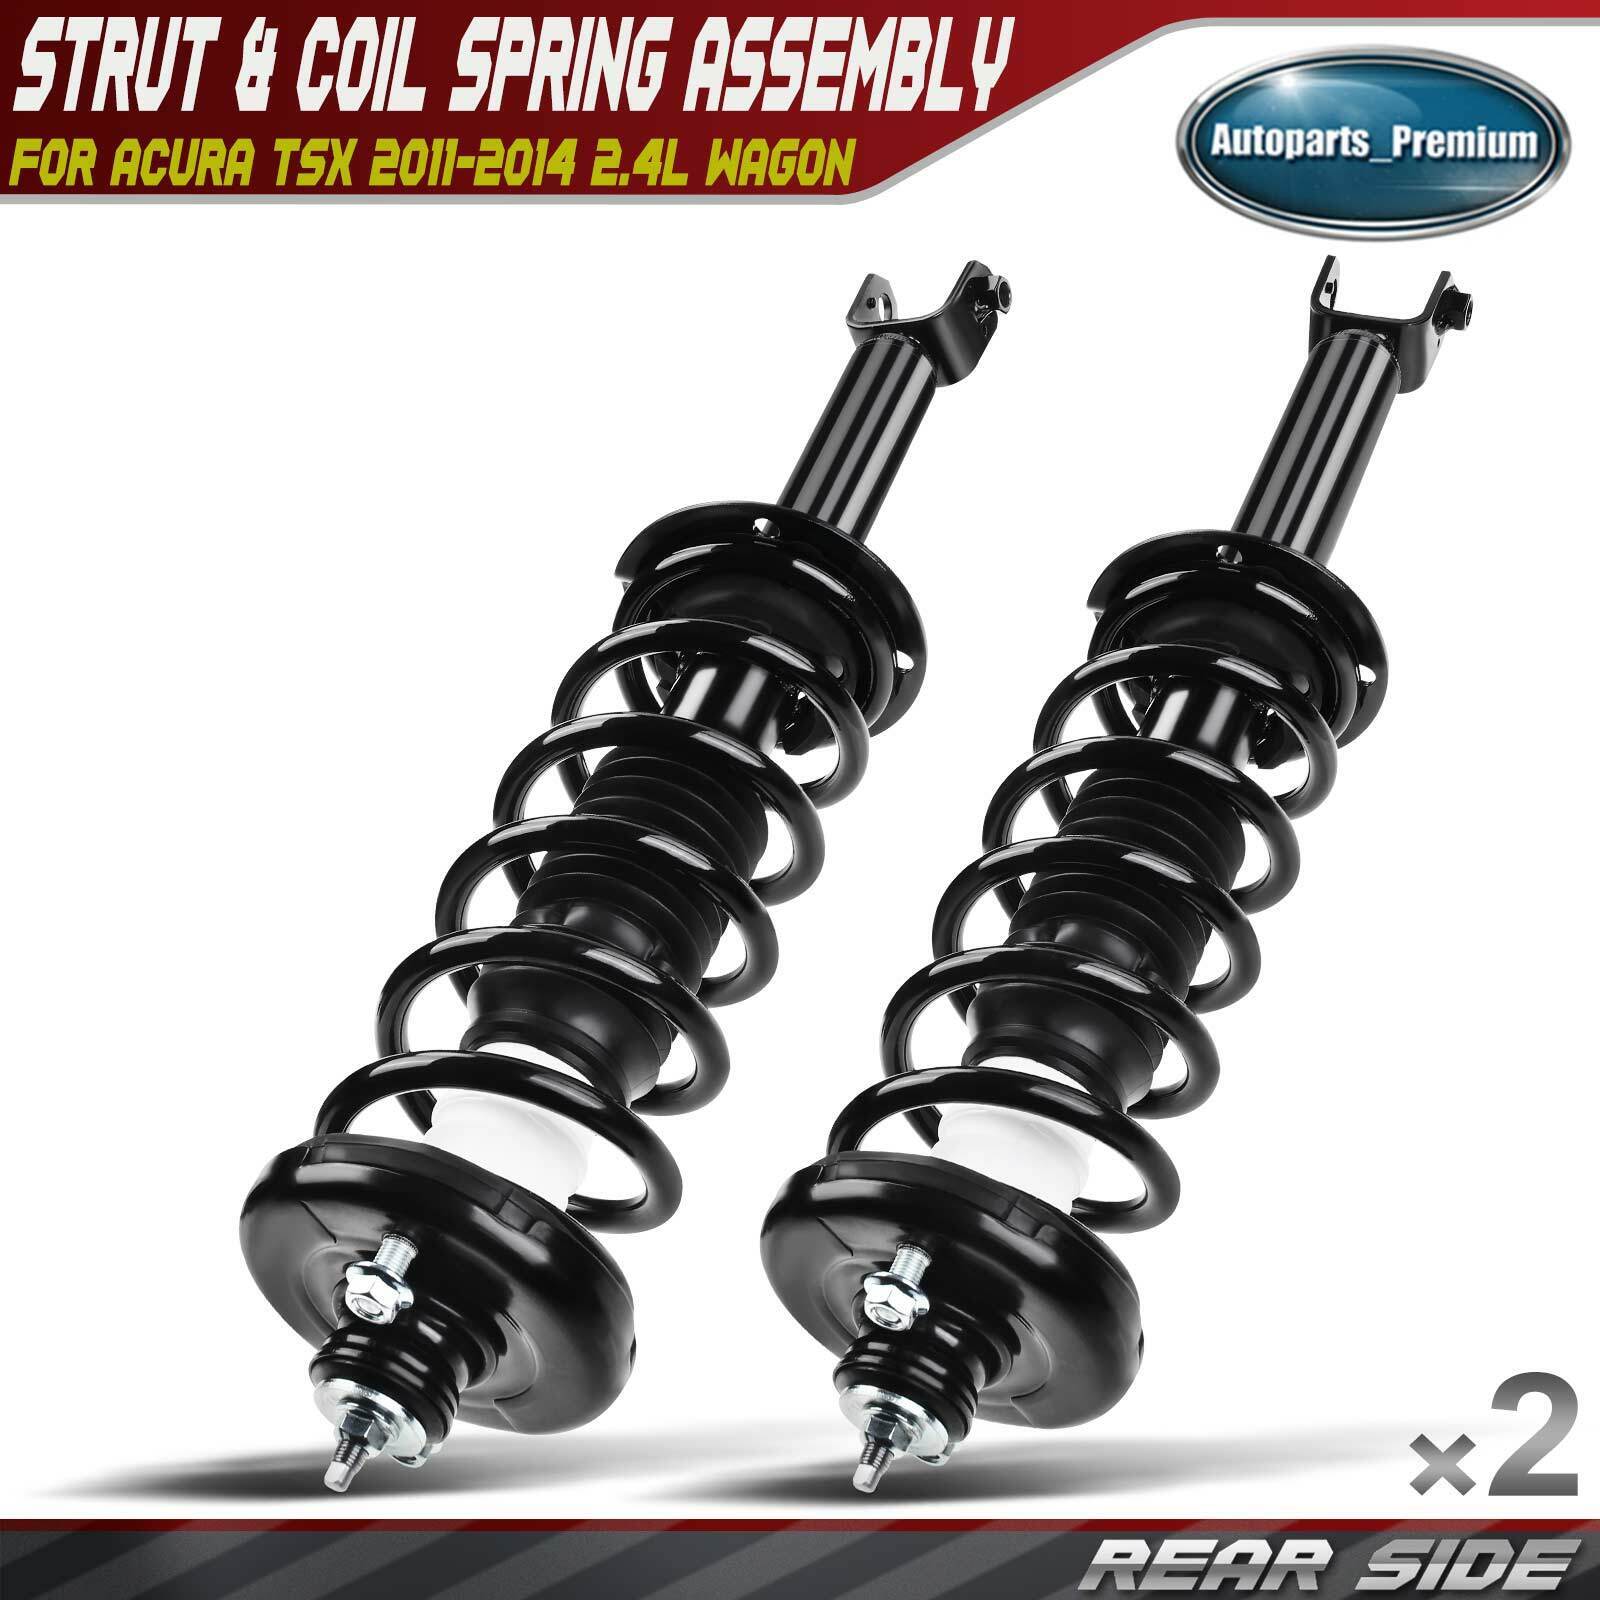 Rear Complete Strut & Coil Spring Assembly for Acura TSX 2011-2014 L4 2.4L Wagon